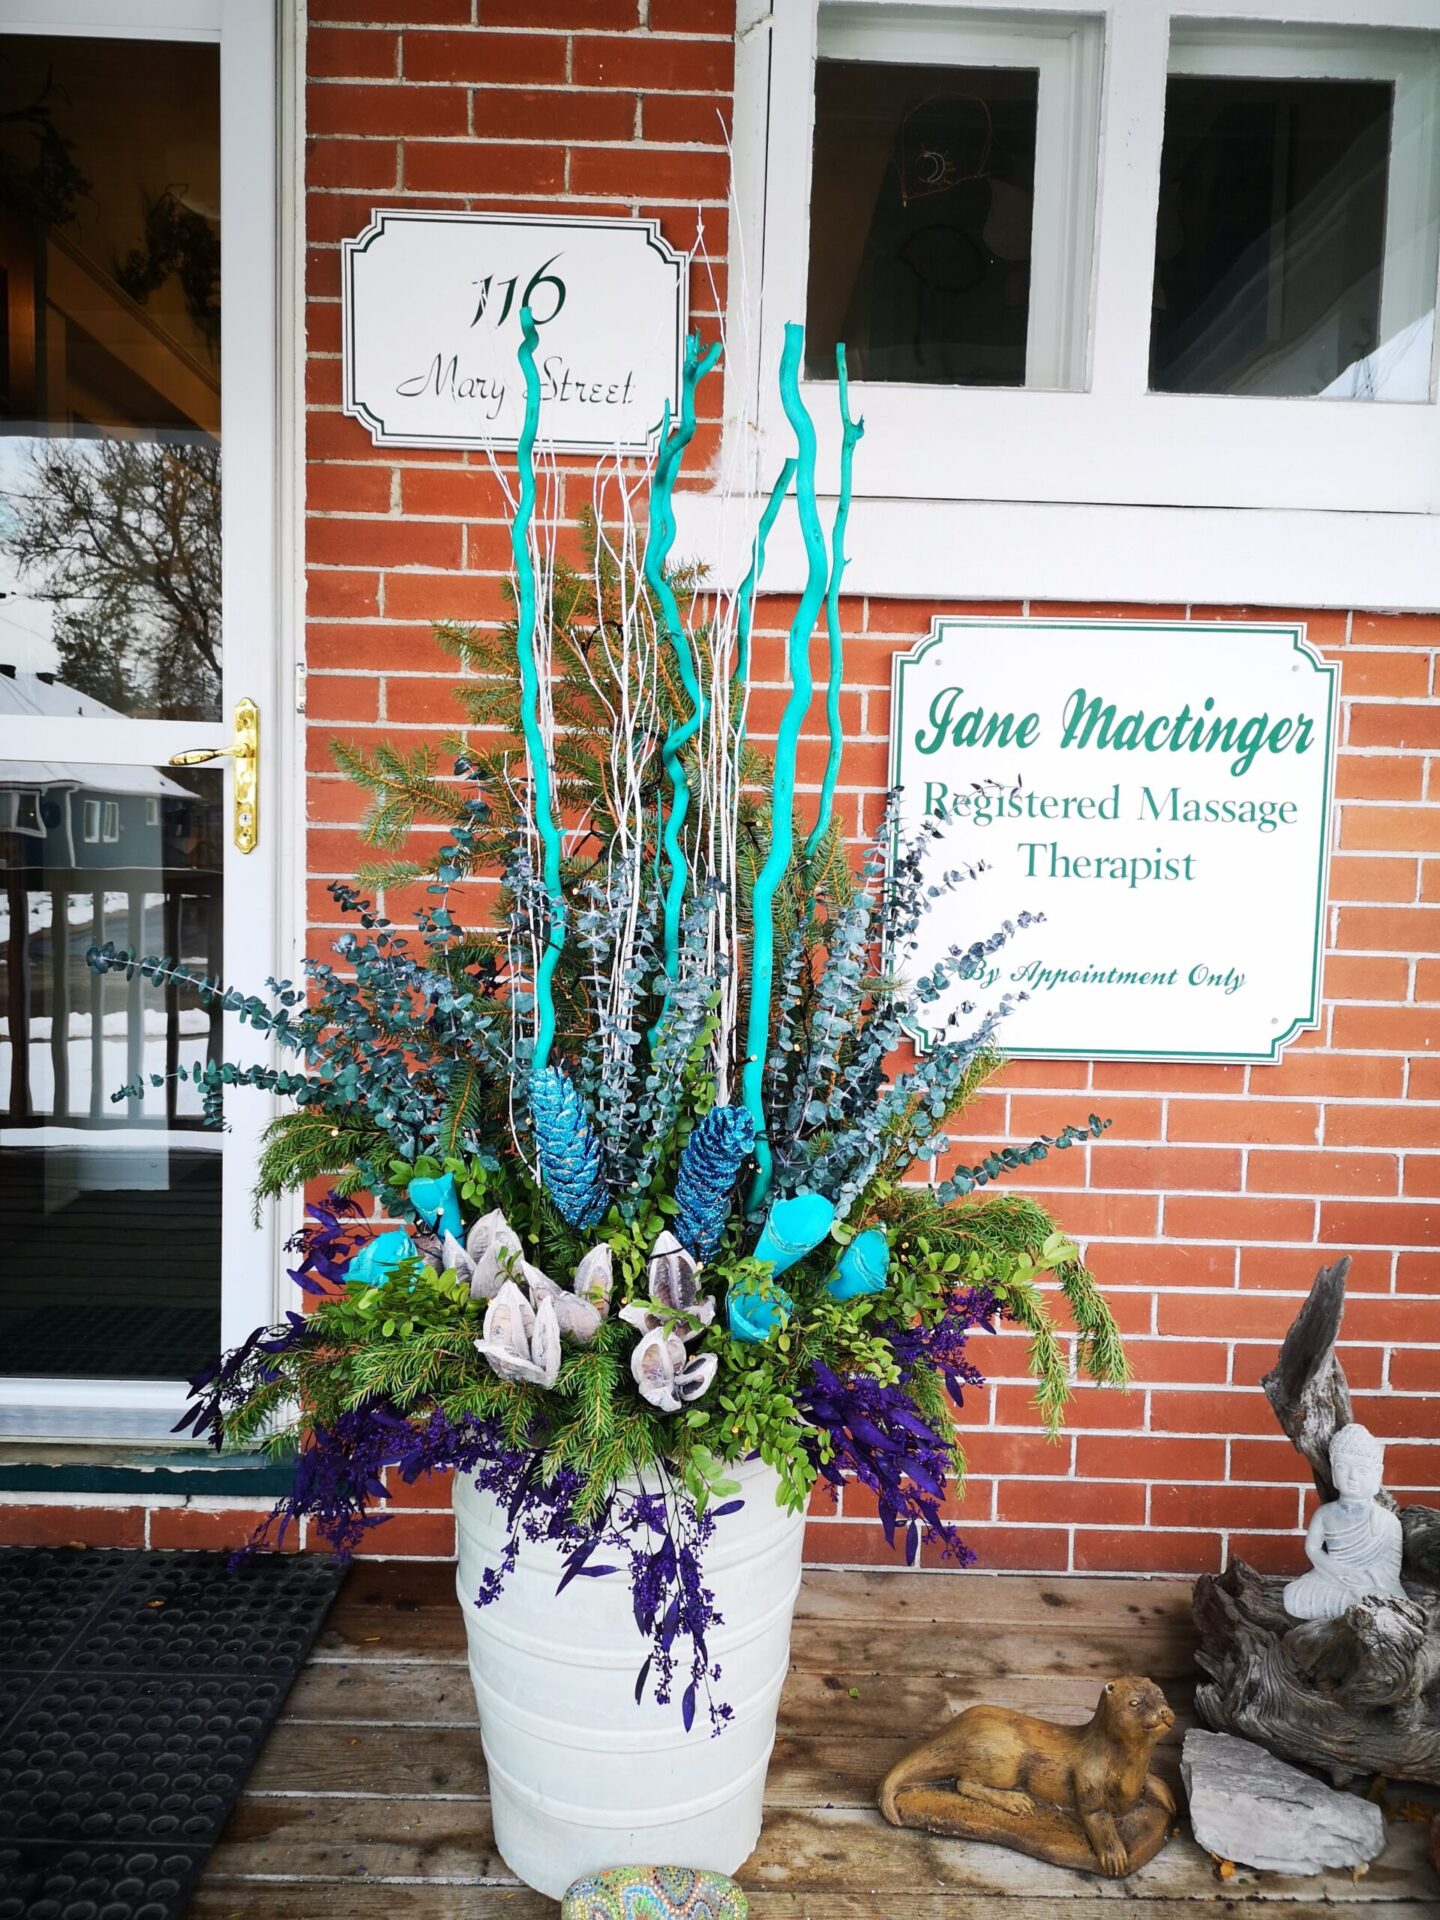 An ornate floral arrangement in a white pot, featuring blue accents, sits on a porch by a door with informational signs, on a wooden deck.